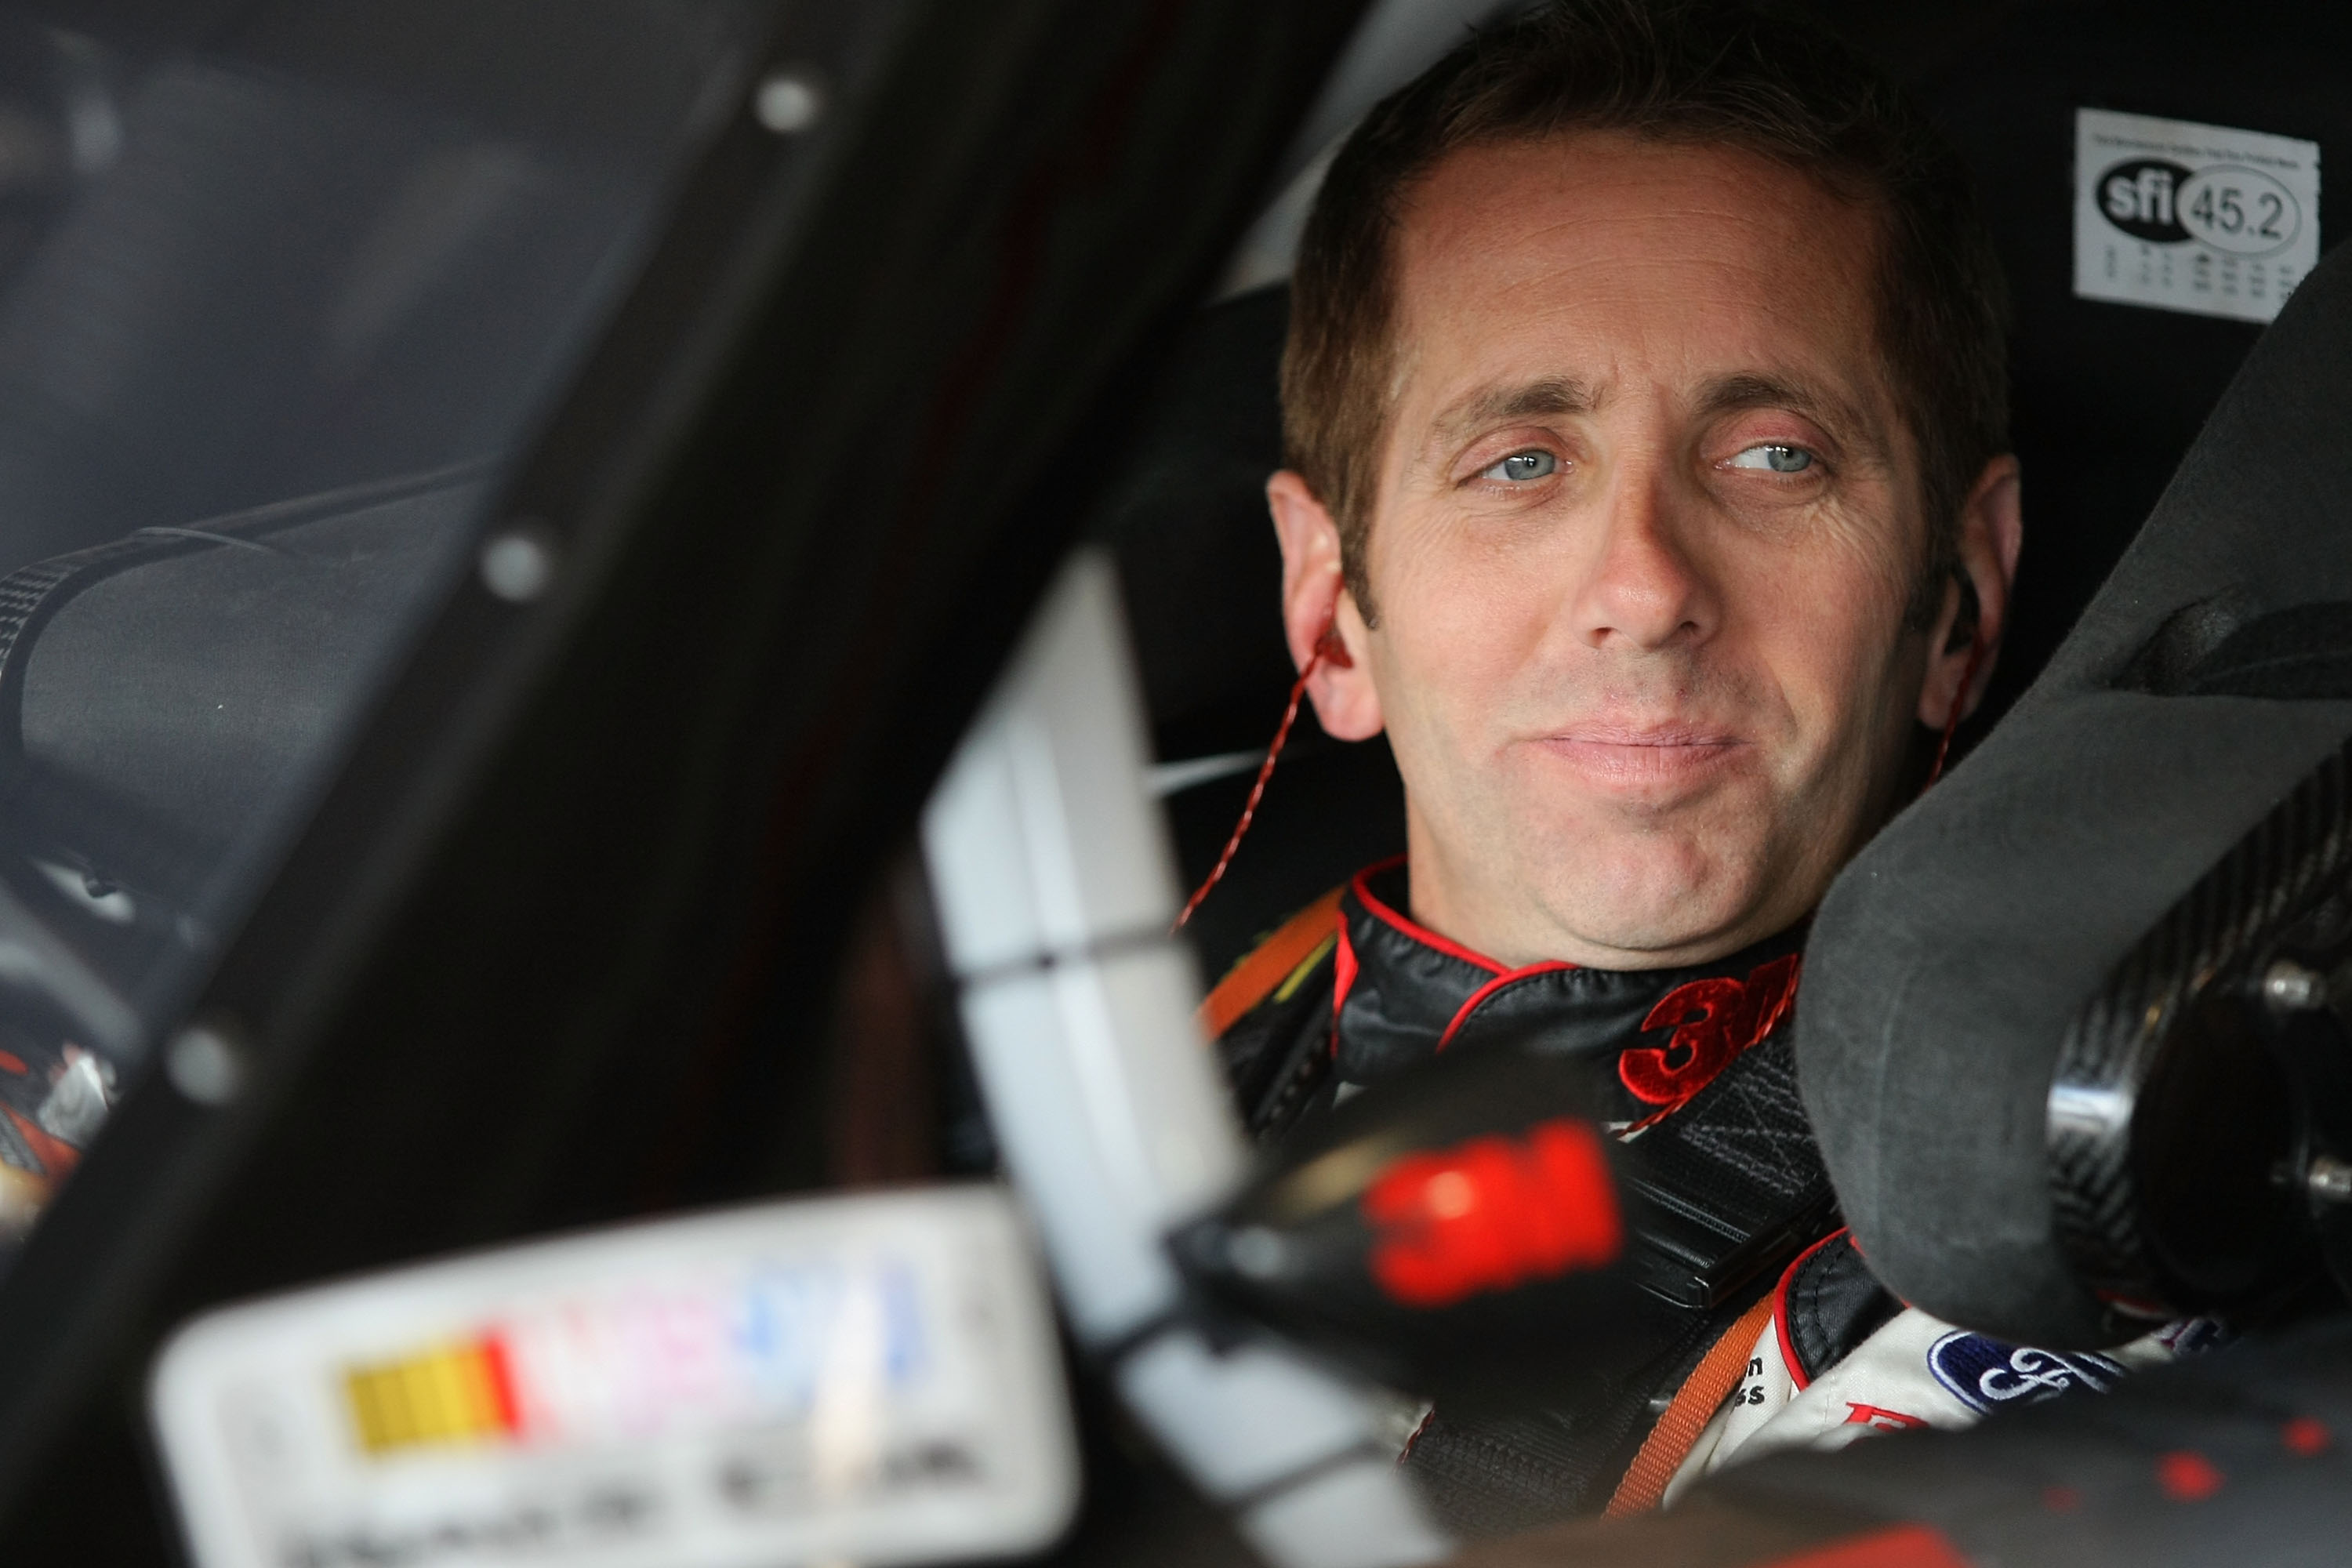 FONTANA, CA - MARCH 25:  Greg Biffle, driver of the #16 3M Ford, sits in his car during practice for the NASCAR Sprint Cup Series Auto Club 400 at Auto Club Speedway on March 25, 2011 in Fontana, California.  (Photo by Victor Decolongon/Getty Images for N